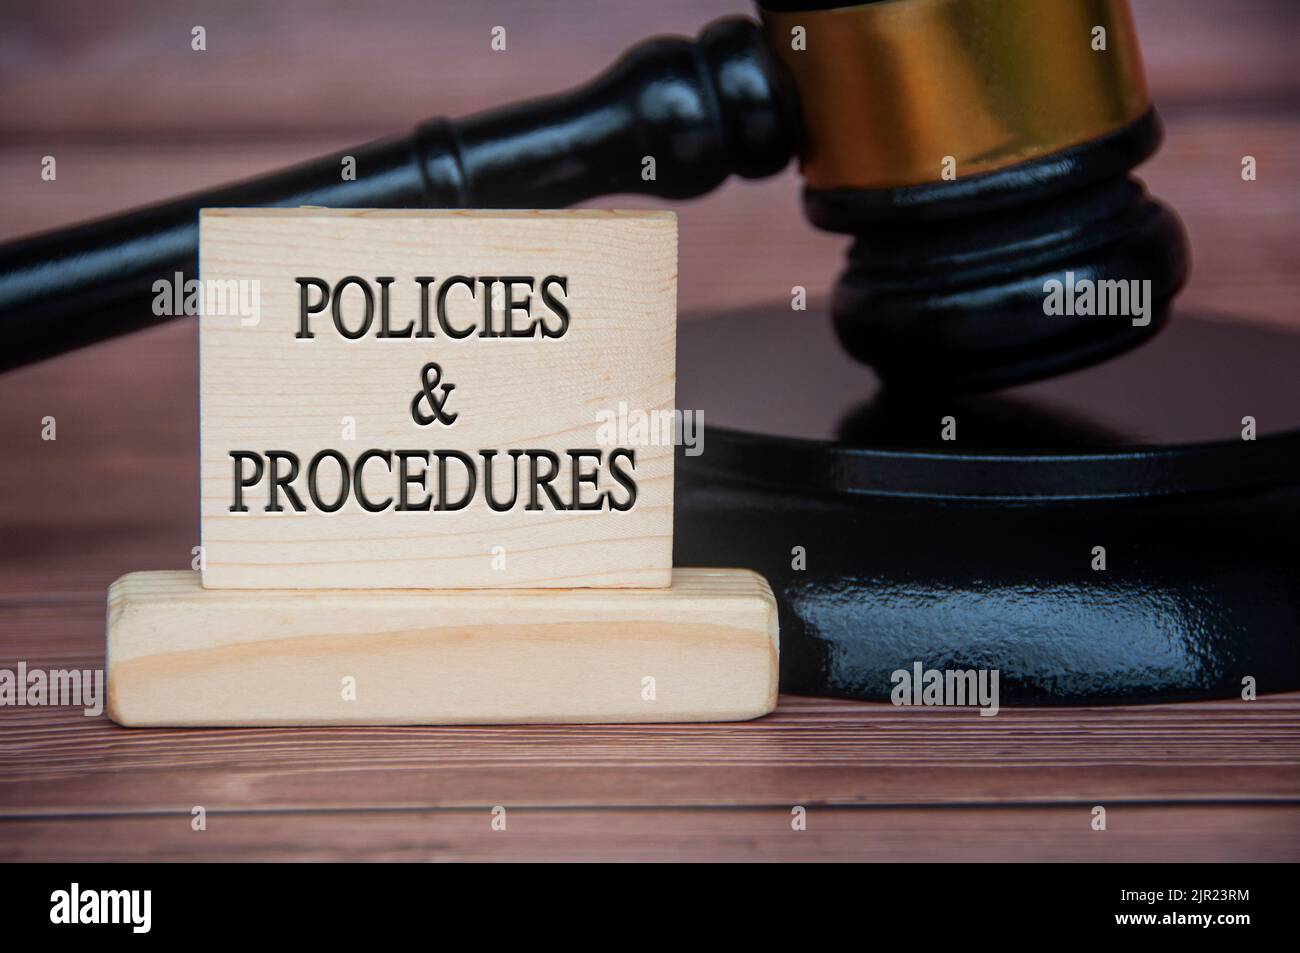 Policies and procedures text engraved on wooden block with gavel background. Policy and procedure concept. Stock Photo